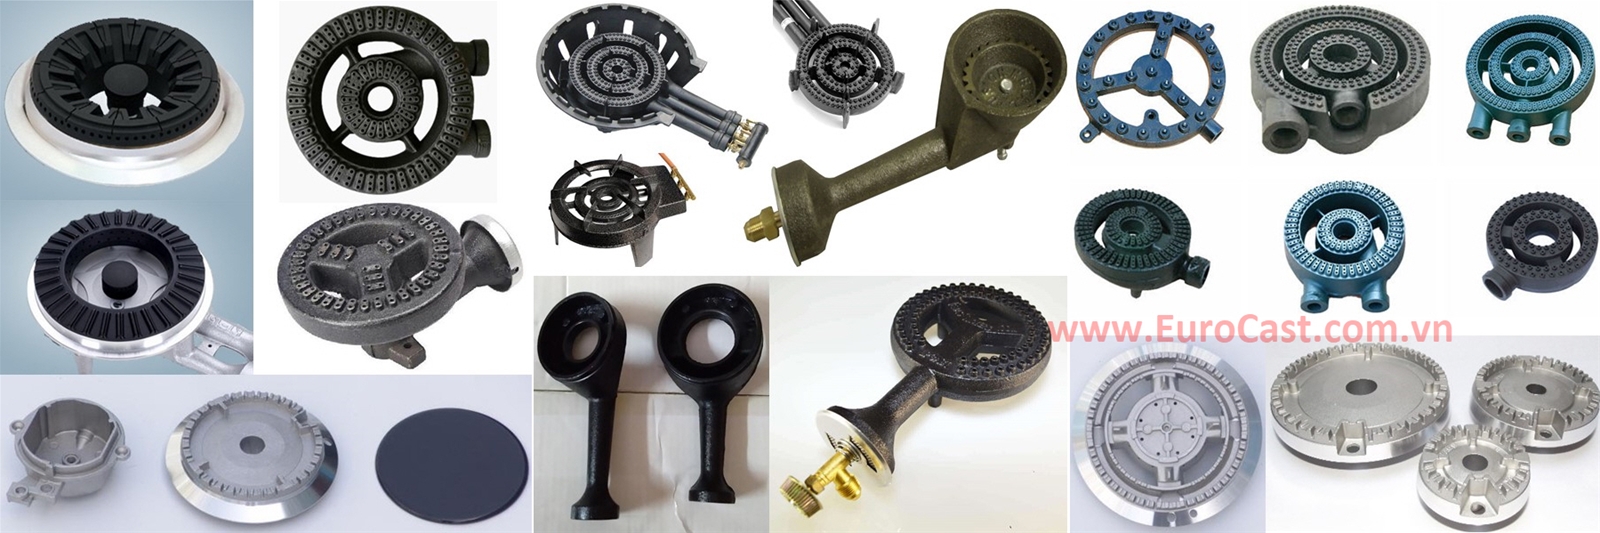 Gas cooker Component by investment casting